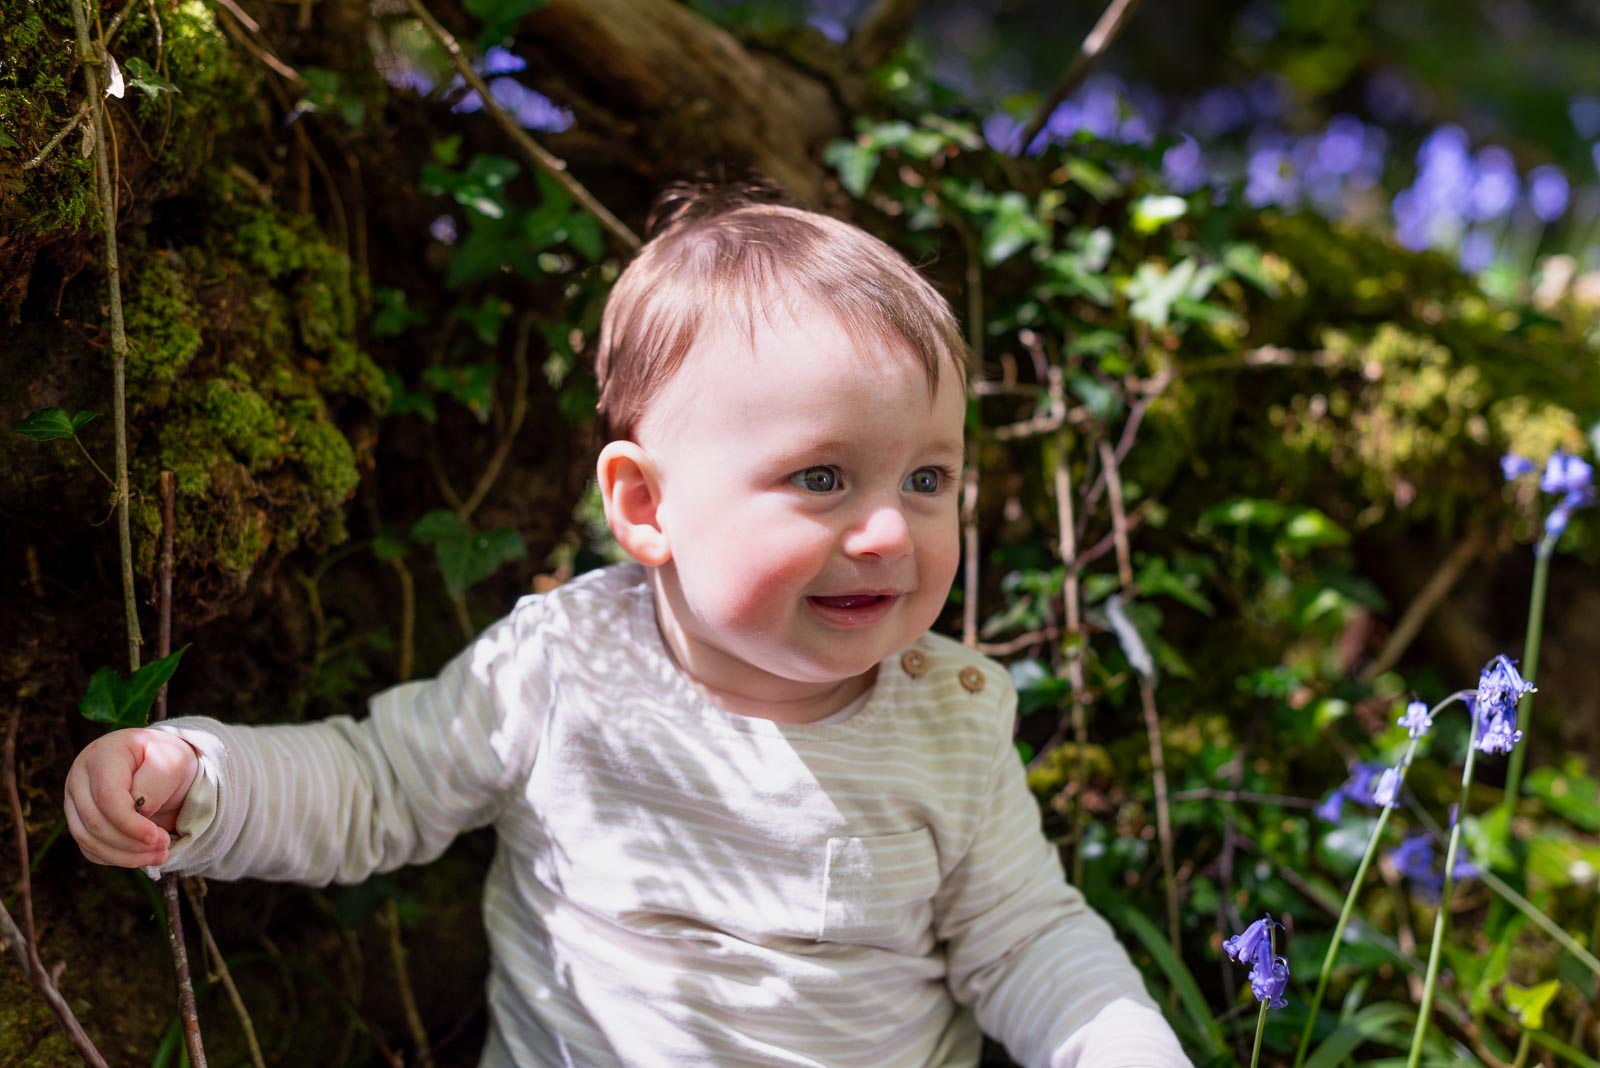 Eight month old baby Alasdair sits down and smiles off camera among the bluebells at Battle Great Woods.